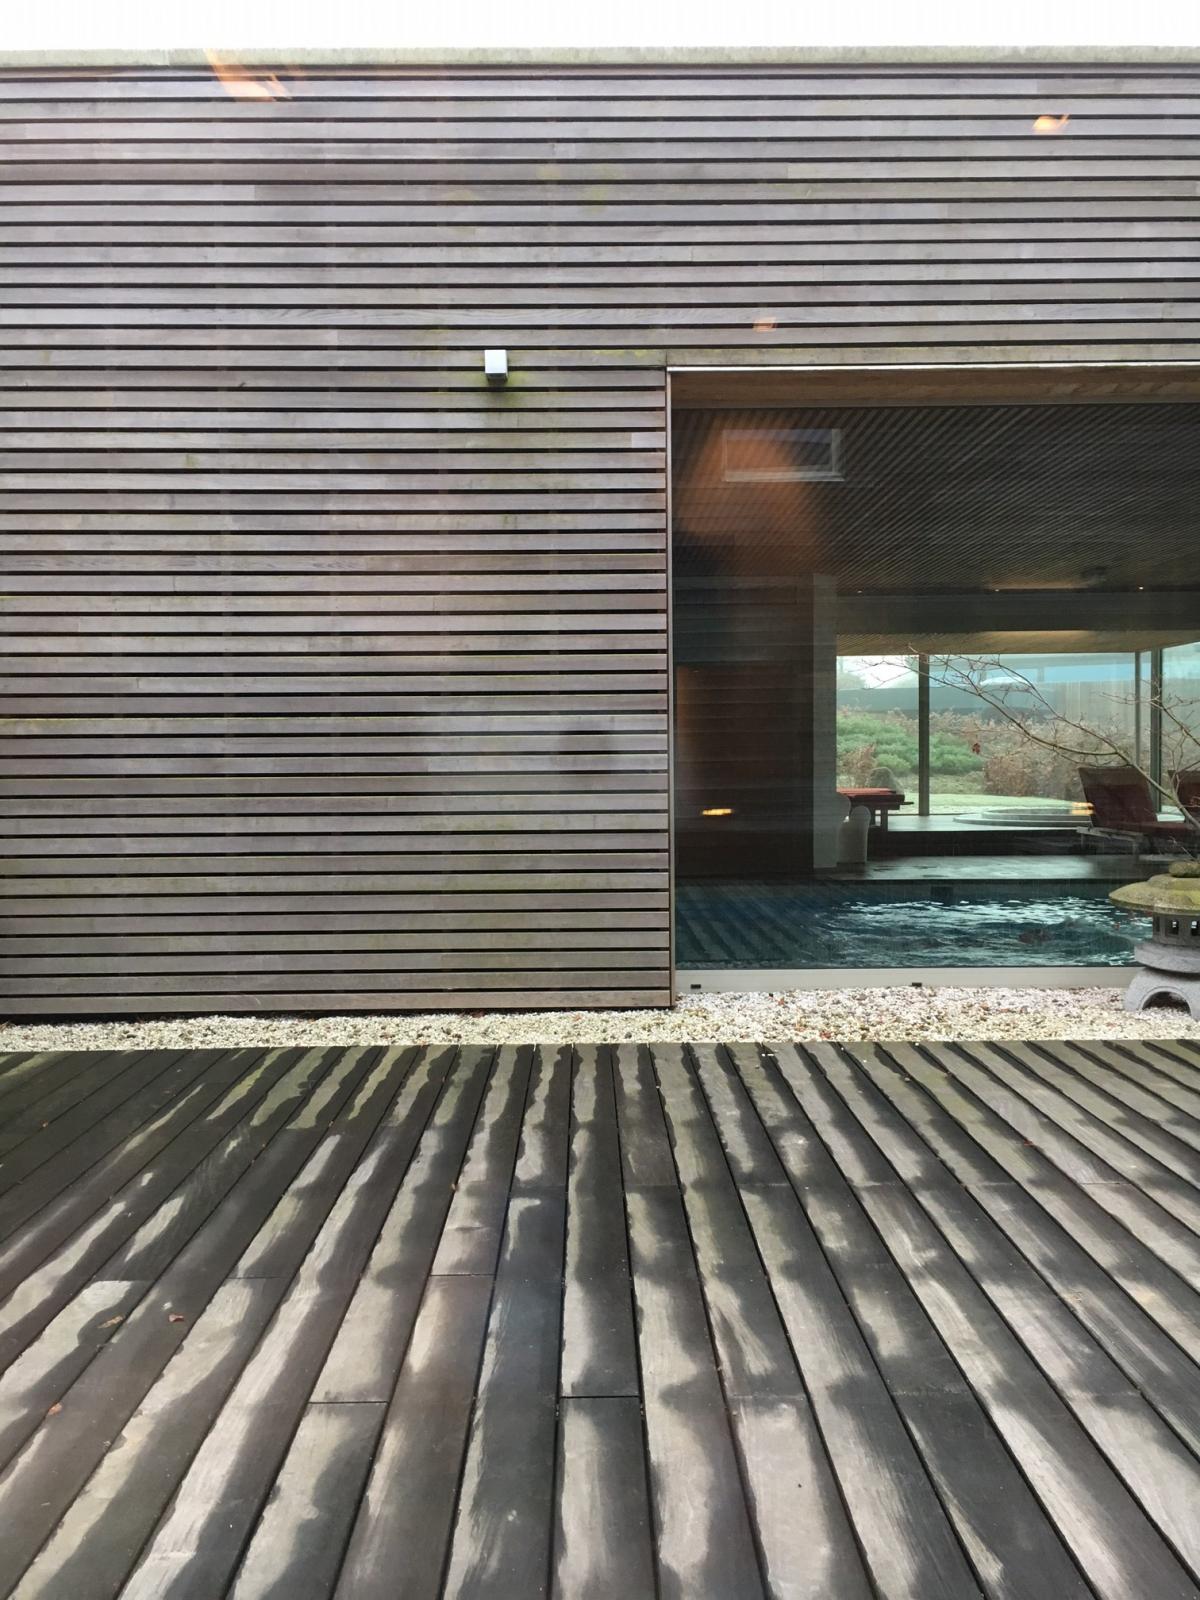 The Nuxe Spa has a Japanese feel